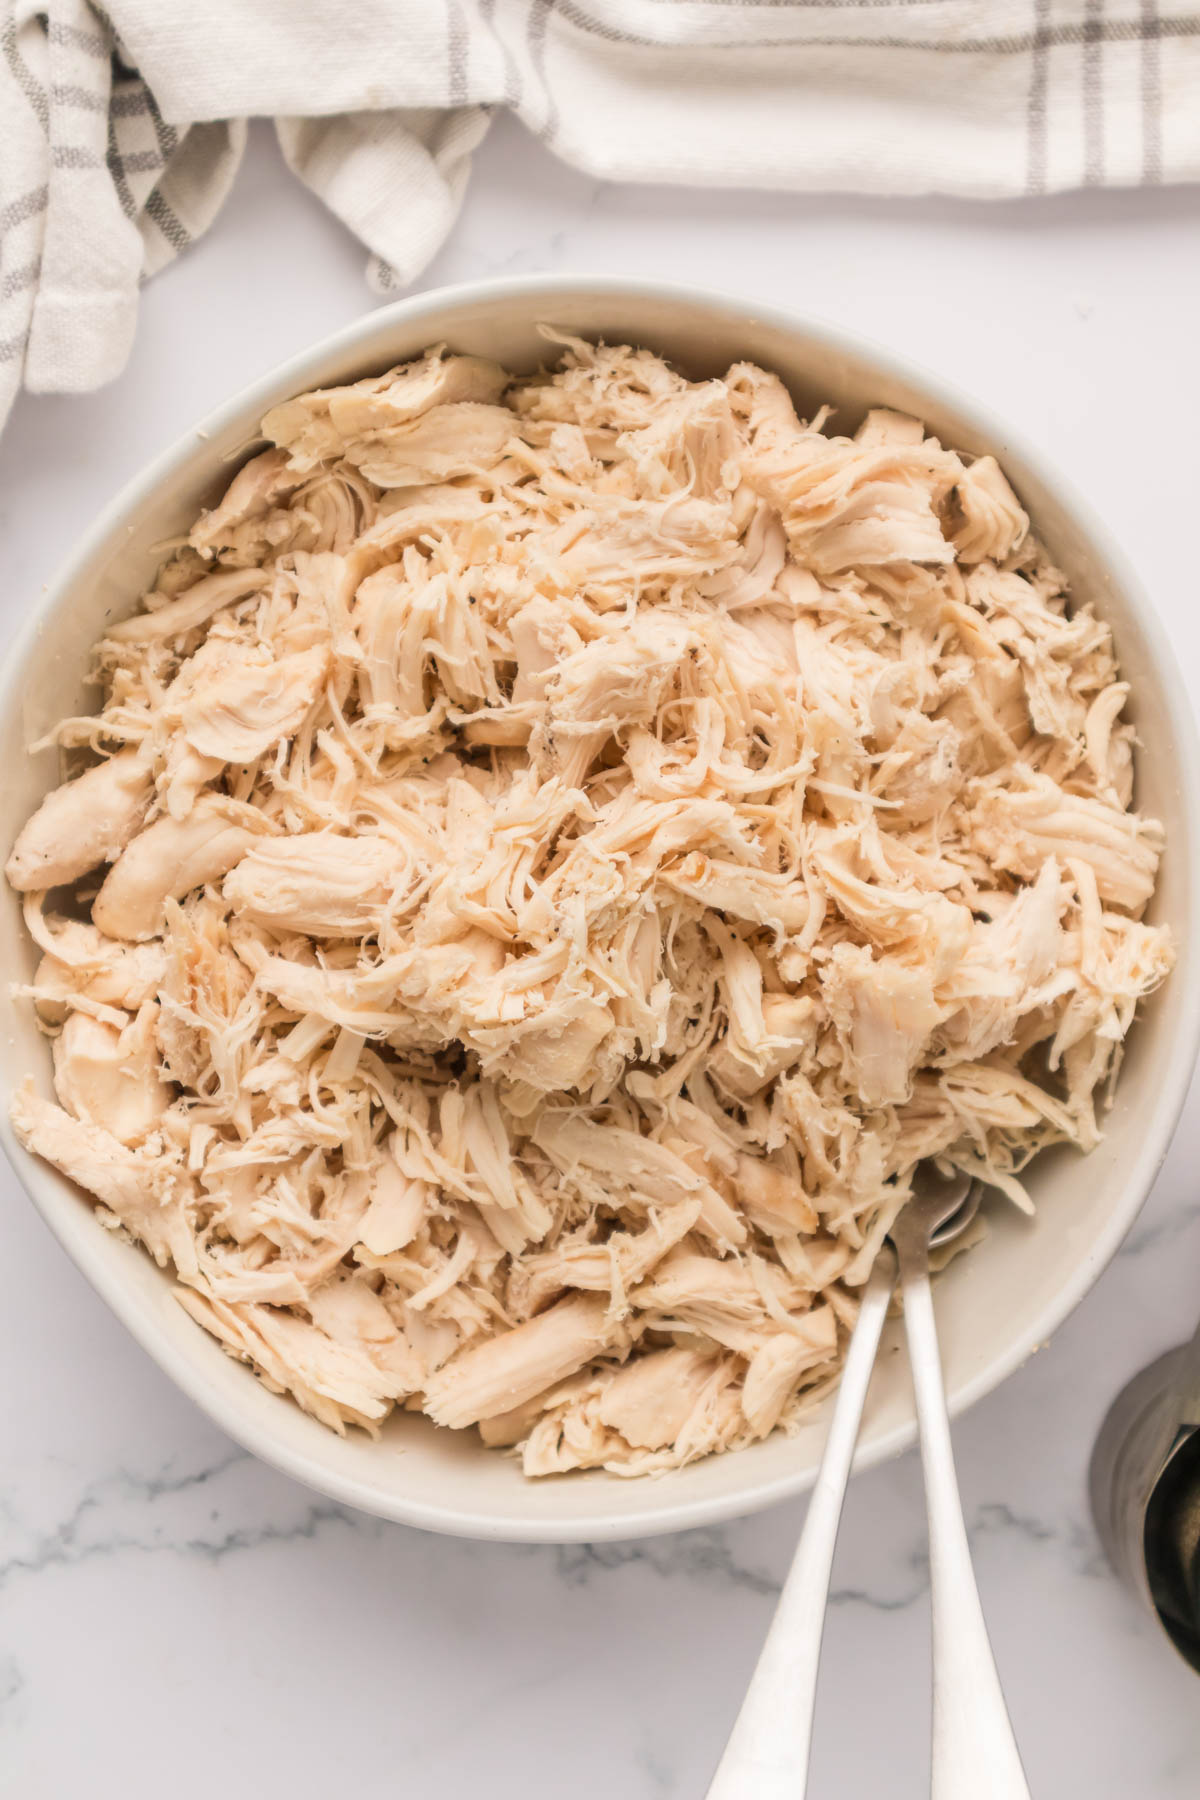 An overhead image of shredded chicken in a bowl.